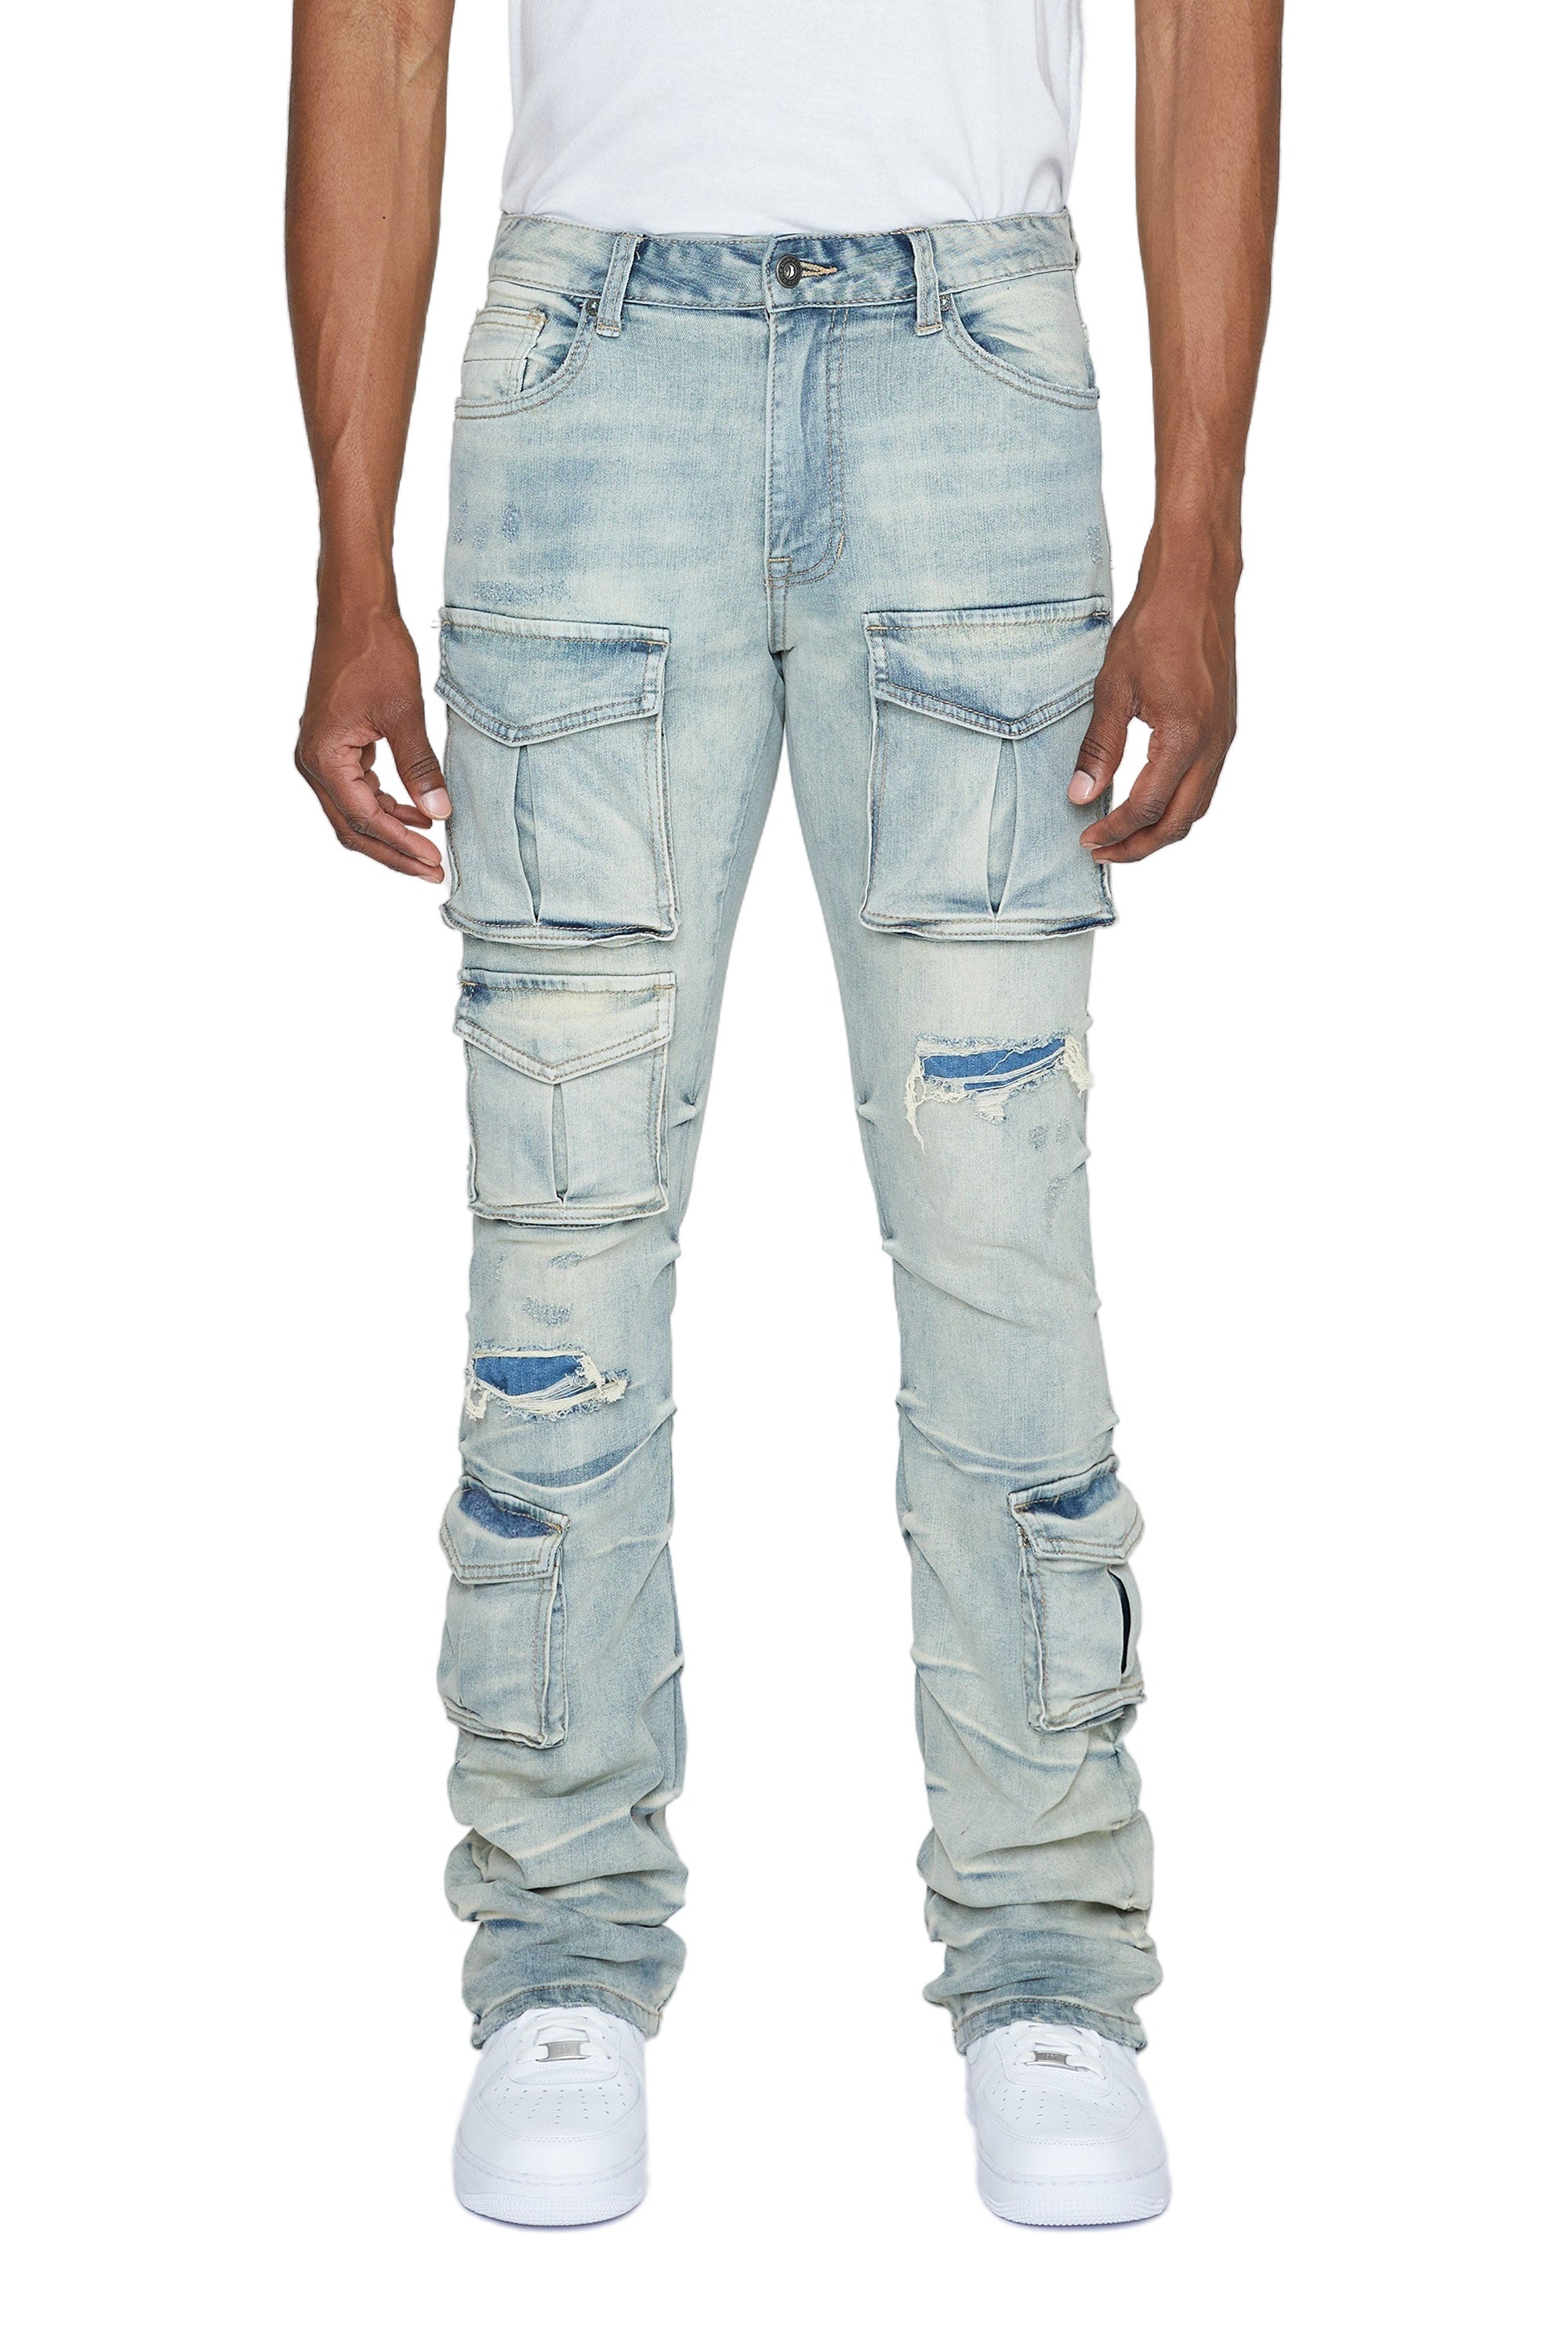 Stacked Utility Denim Jeans - Industrial Blue